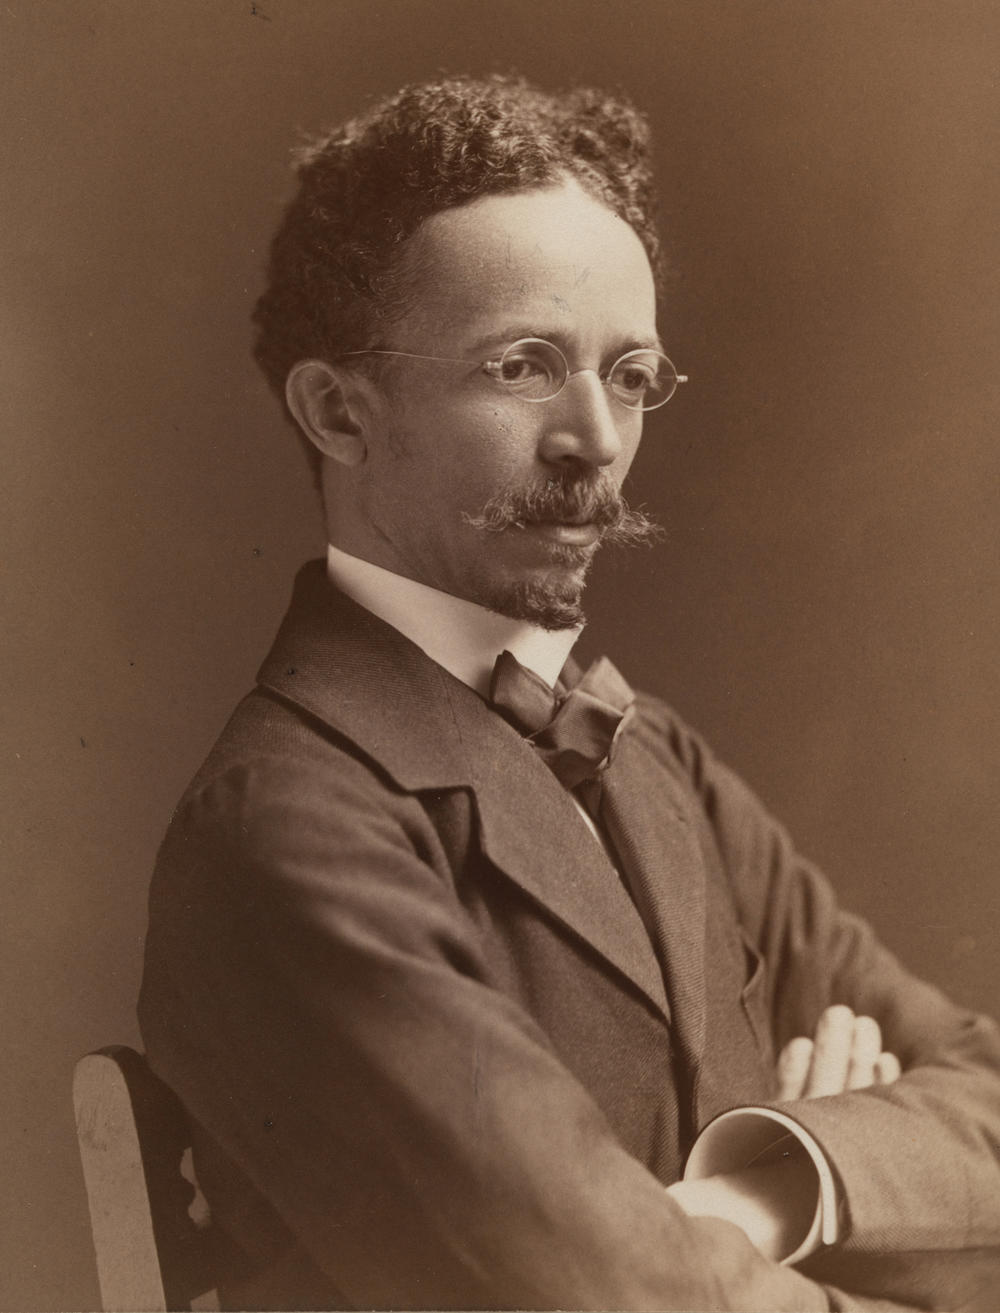 Photograph of Henry Ossawa Tanner in 1907.